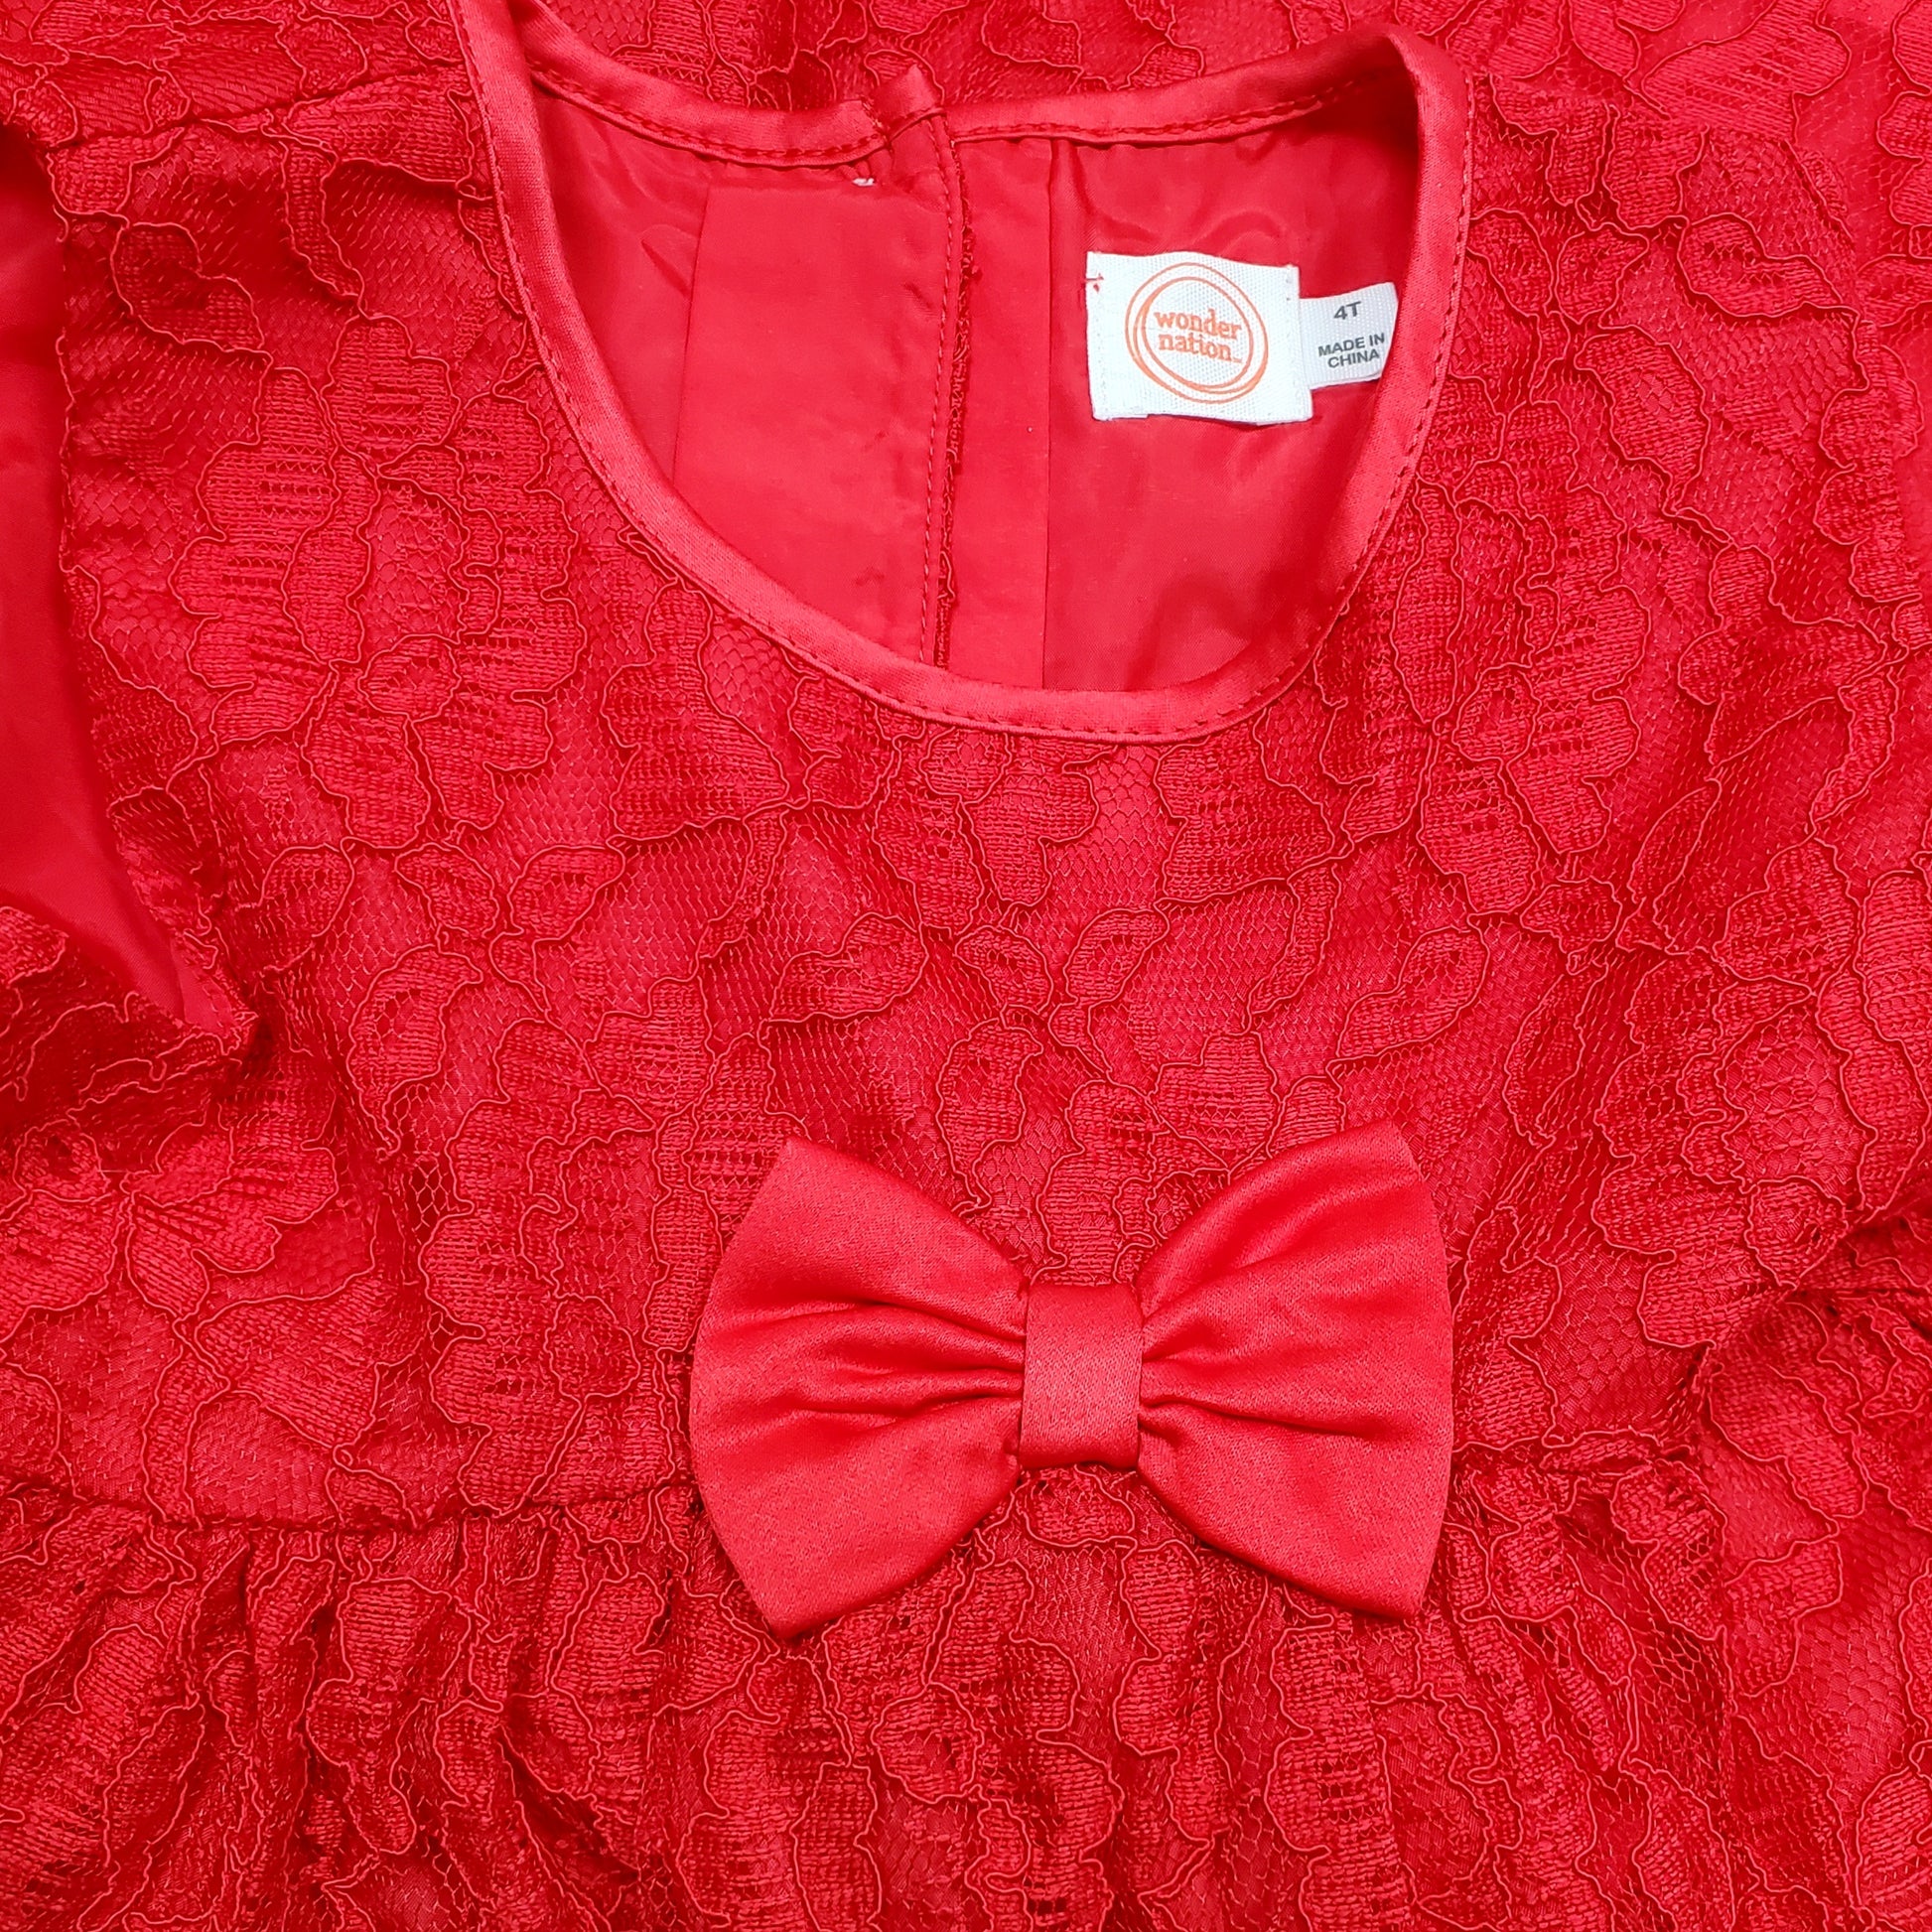 Wonder Nation Red Lace Girls Dress 4T Used View 4